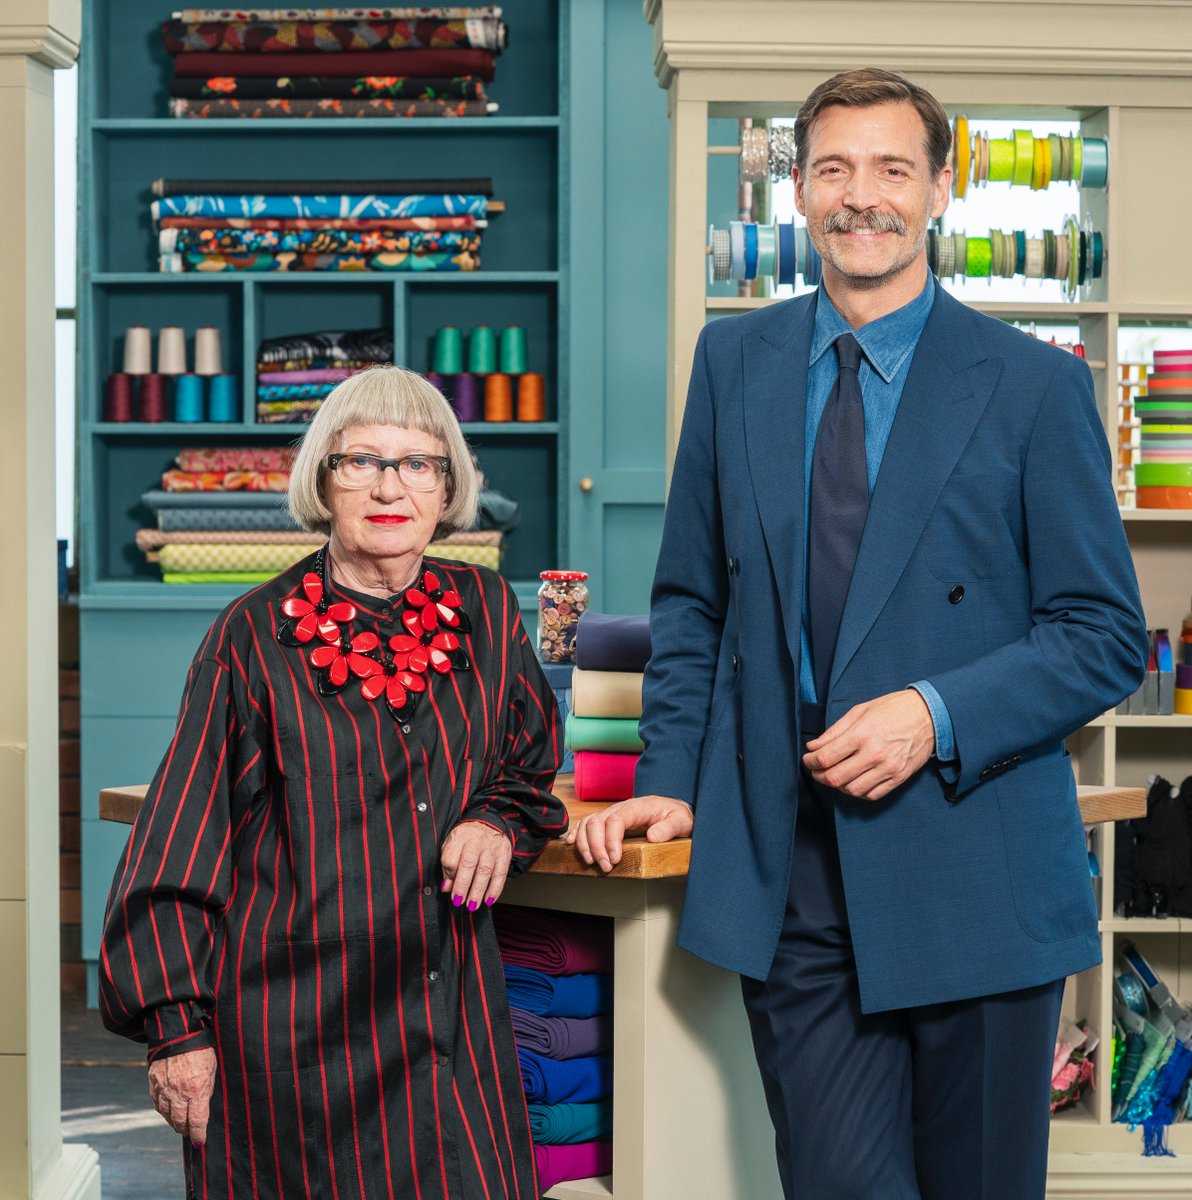 APPLY NOW: Contestants wanted for the new series of BBC 1’s The Great British Sewing Bee. 🧵 Read more here 👉 tinyurl.com/2rdjpz5s